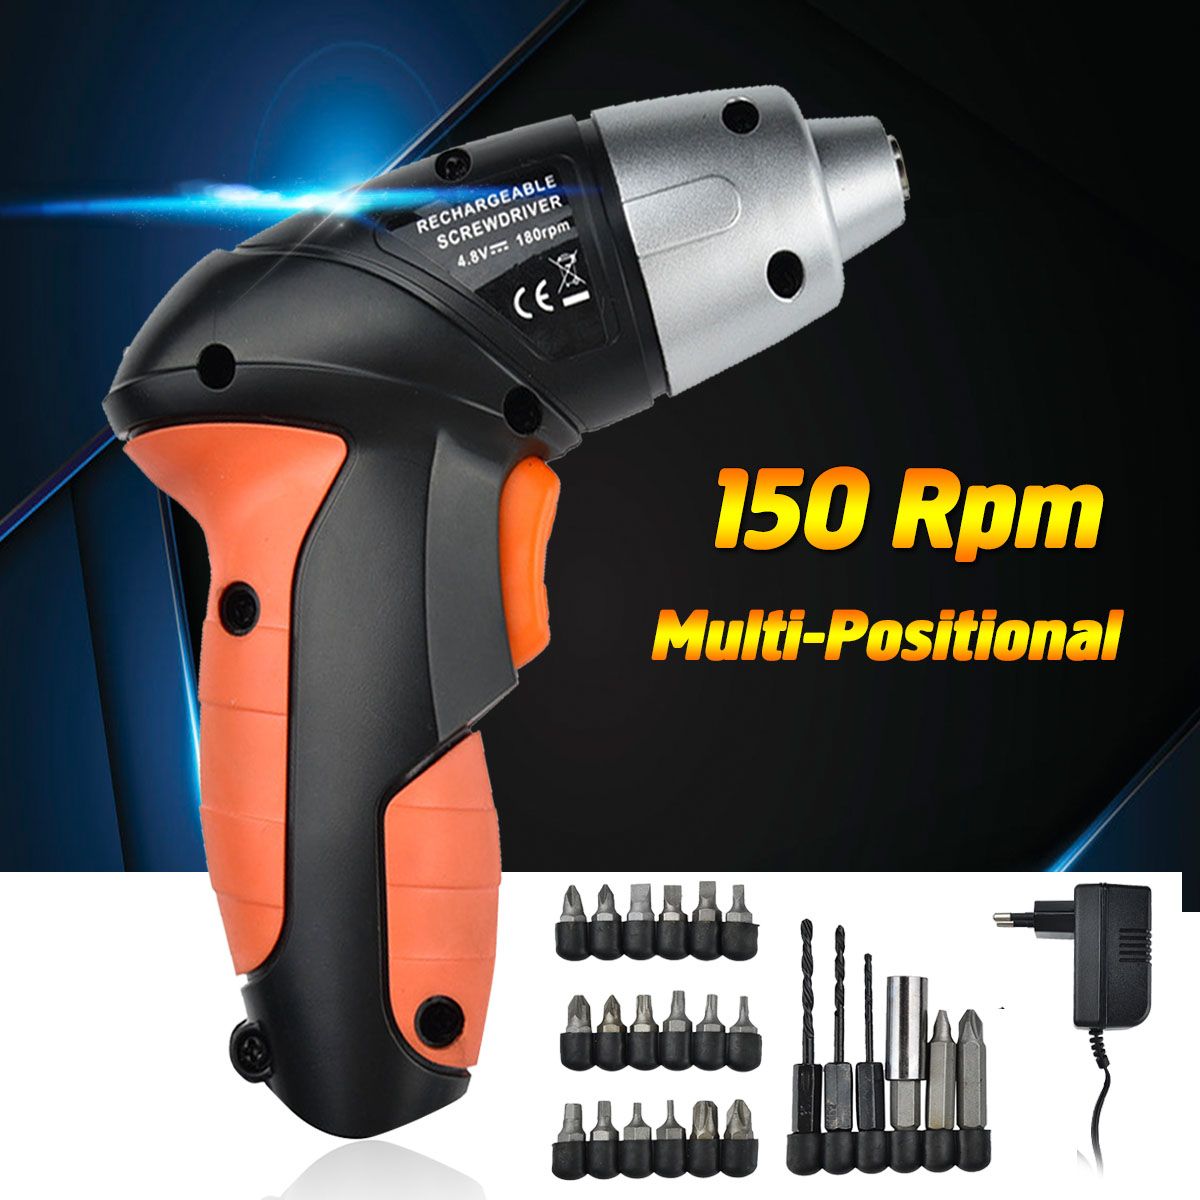 24-PCS-48-V-Electric-Screwdriver-Rechargeable-Battery-Cordless-Screw-Driver-Drill-Bits-Set-1394342